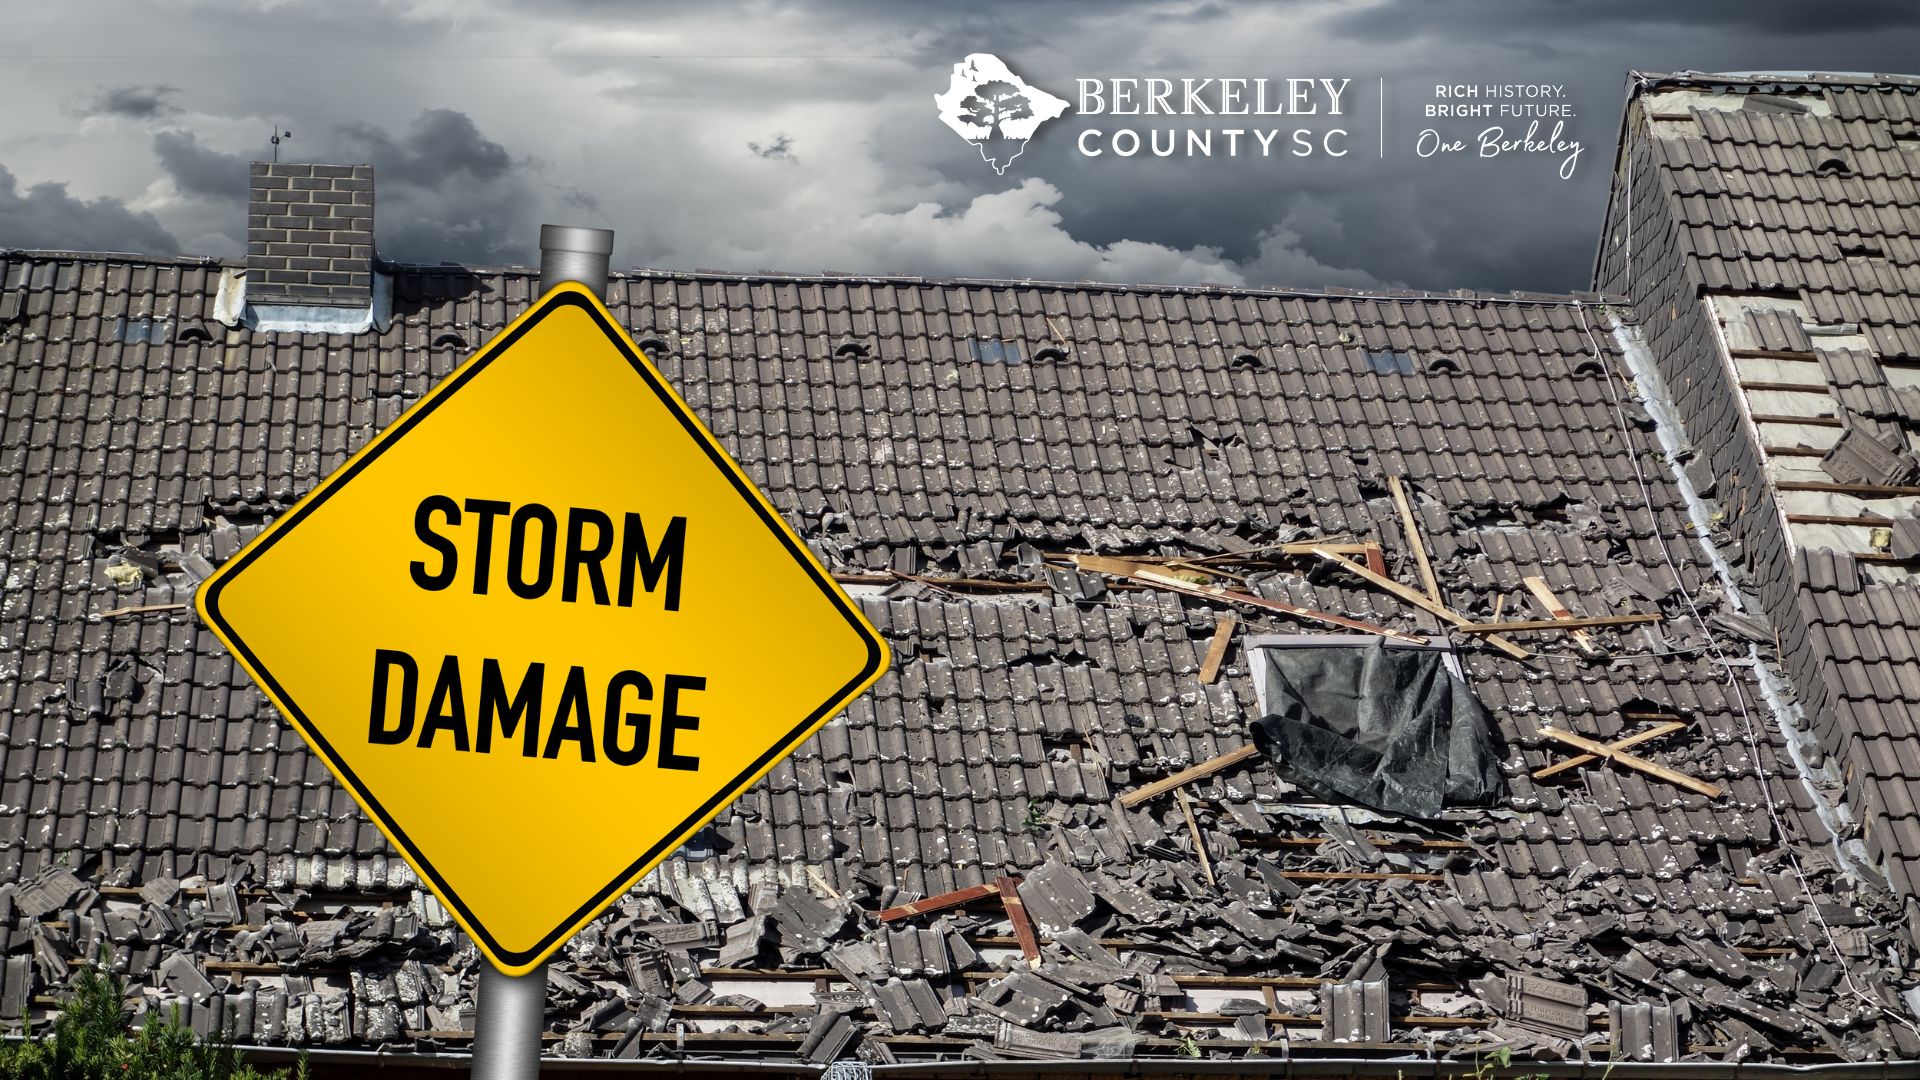 Berkeley County Working to Secure Disaster Recovery Funding for Ian Damage